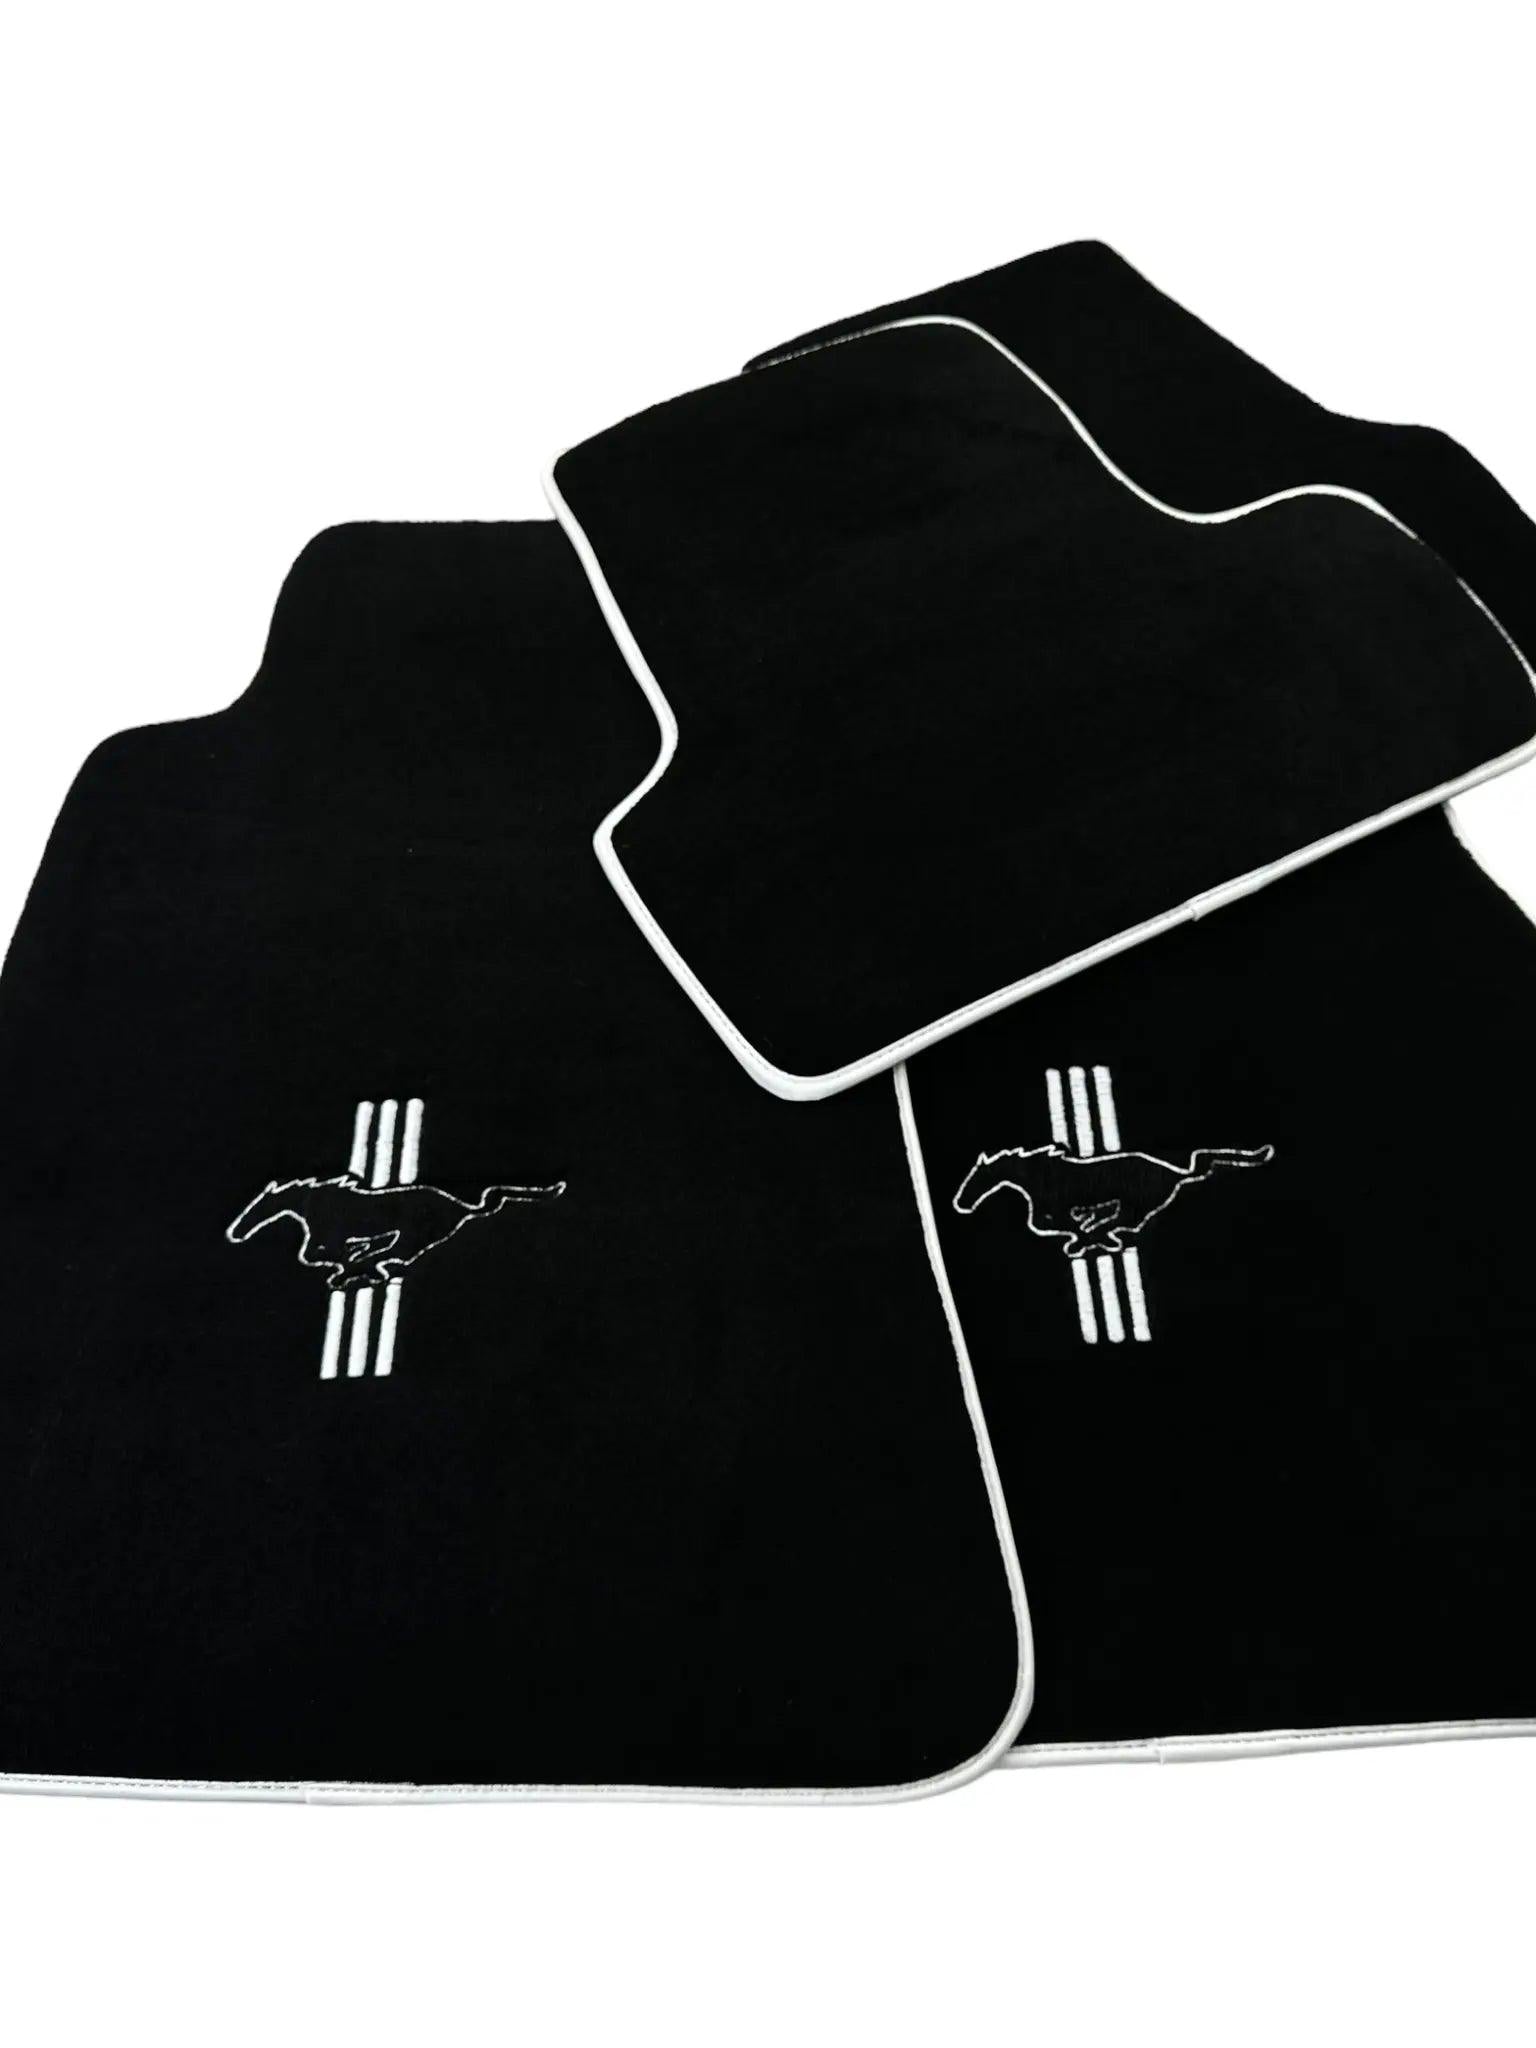 Black Floor Mats with White Trim For Ford Mustang V (2004-2010) With Pony